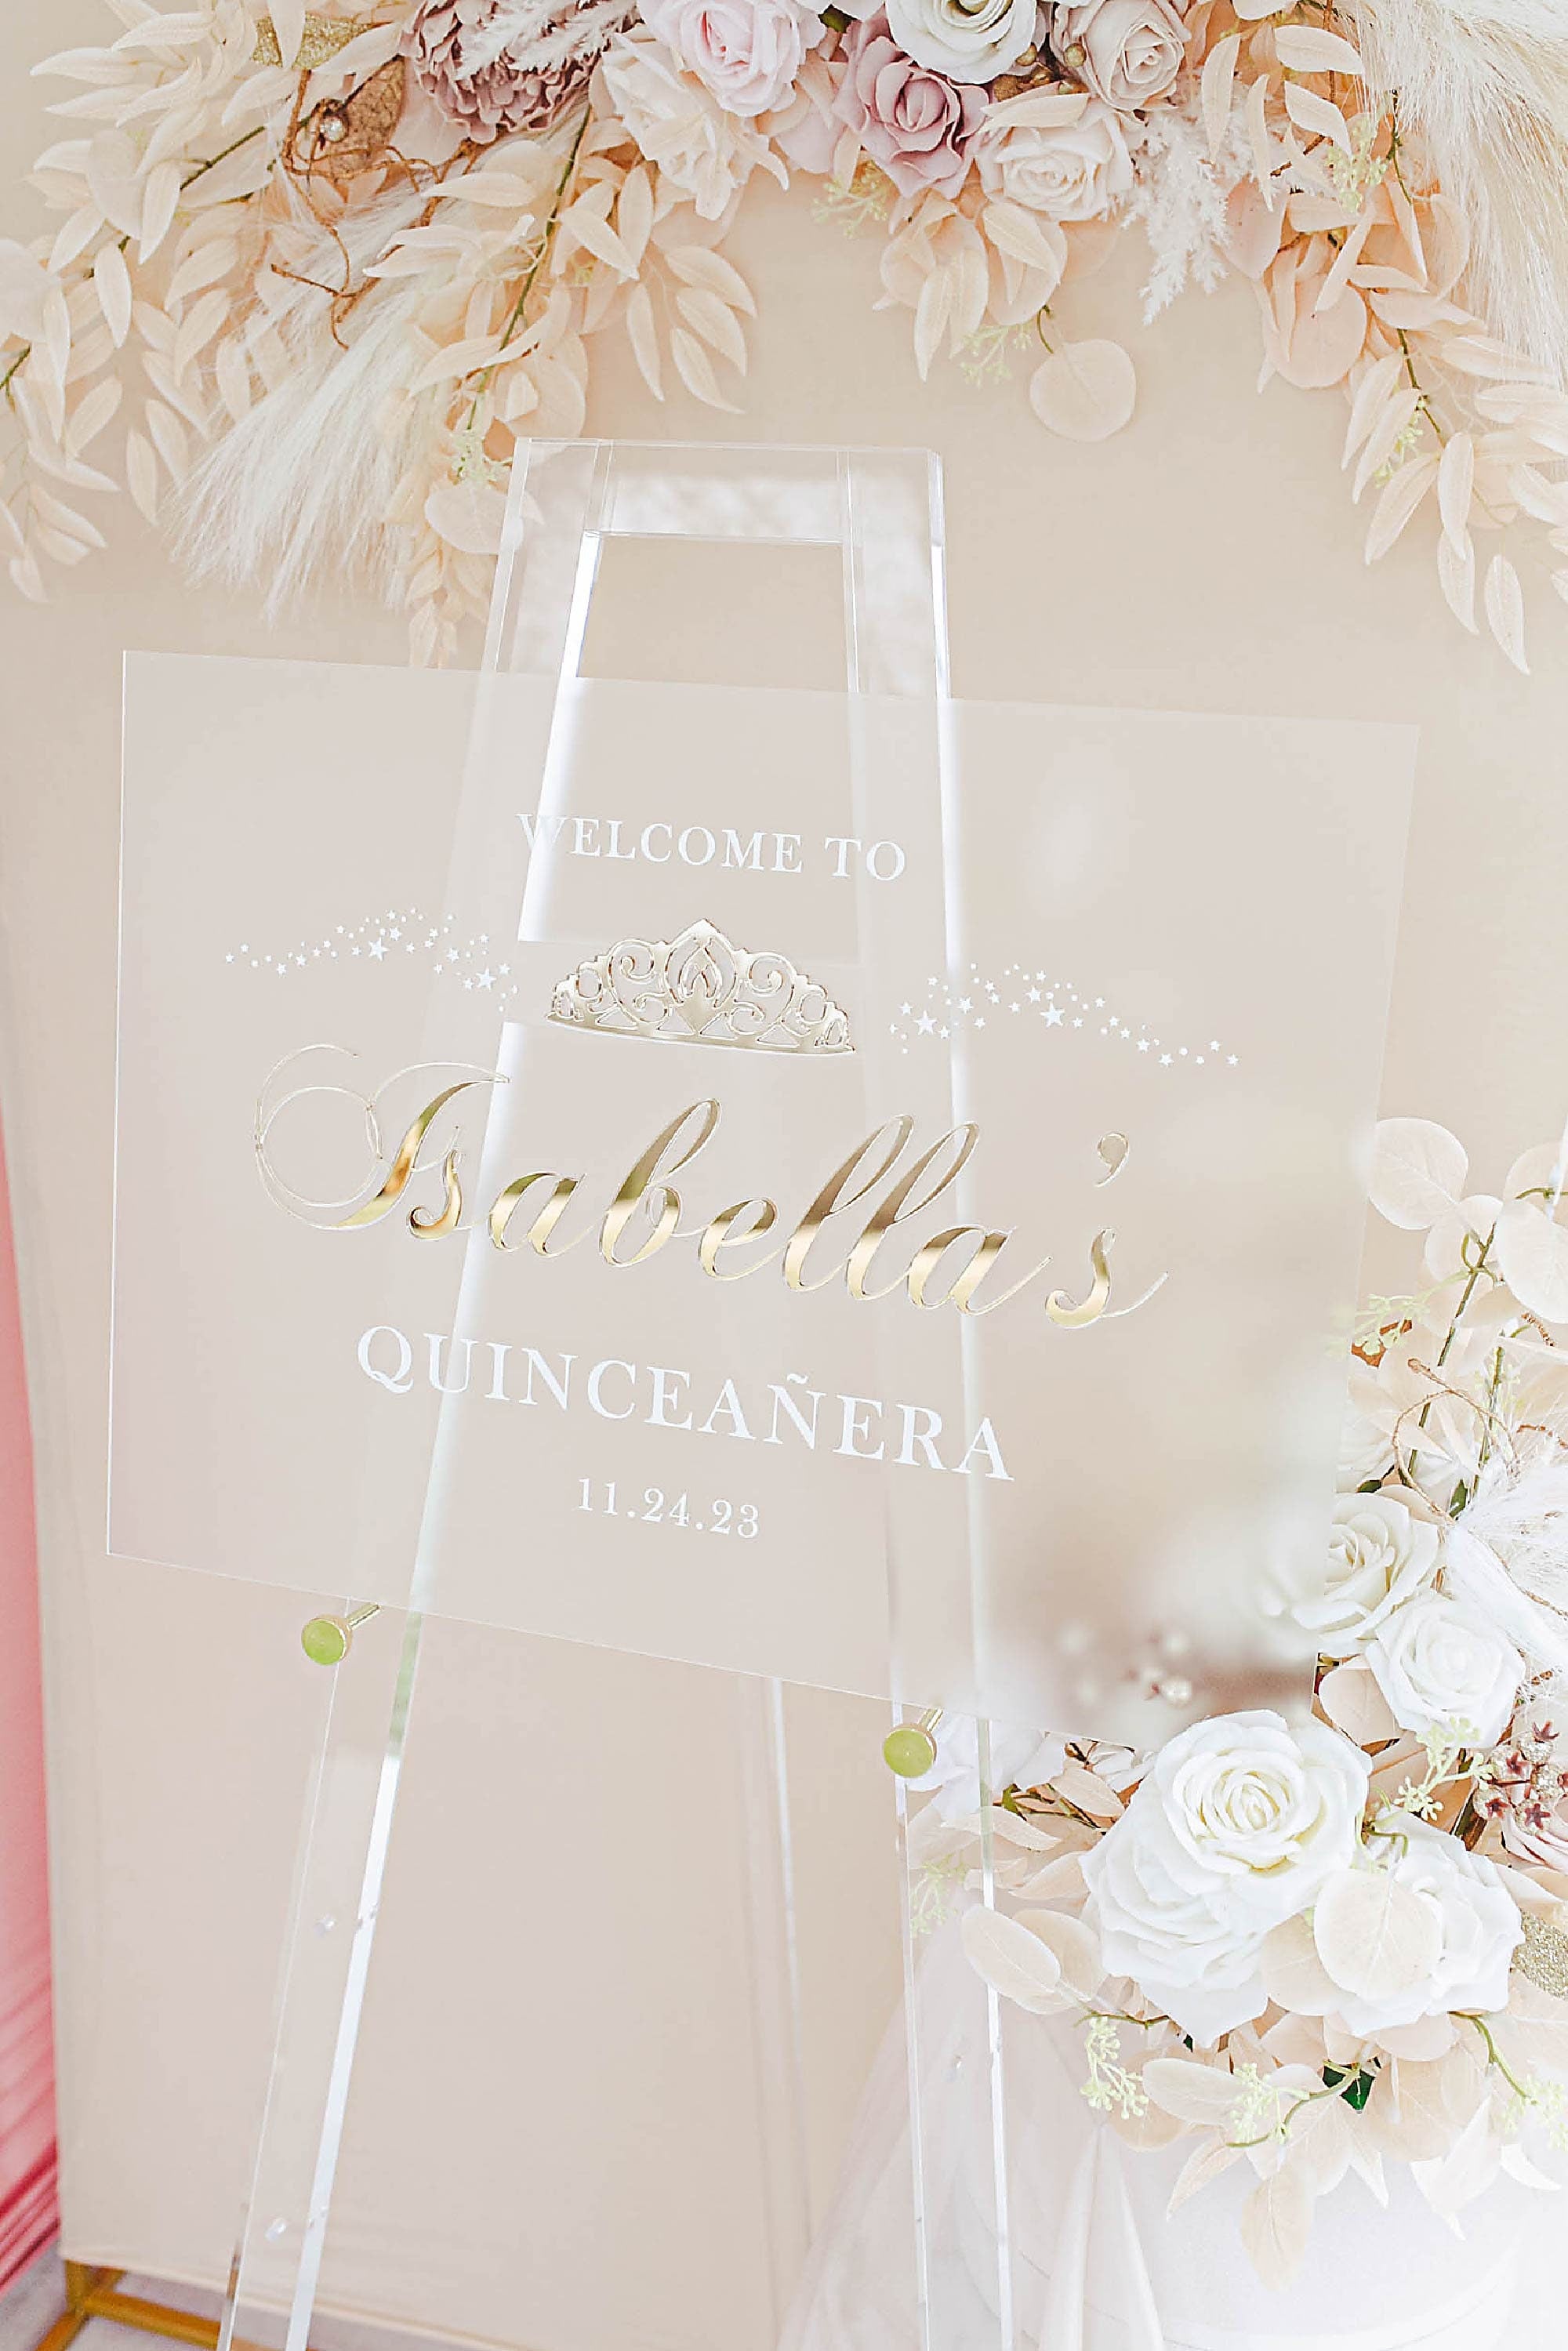 3DF36-ES1 3D Quinceanera Event Entry Signs with Laser Cut Wording - Sign Sizes 18"x24" or 24"x36"